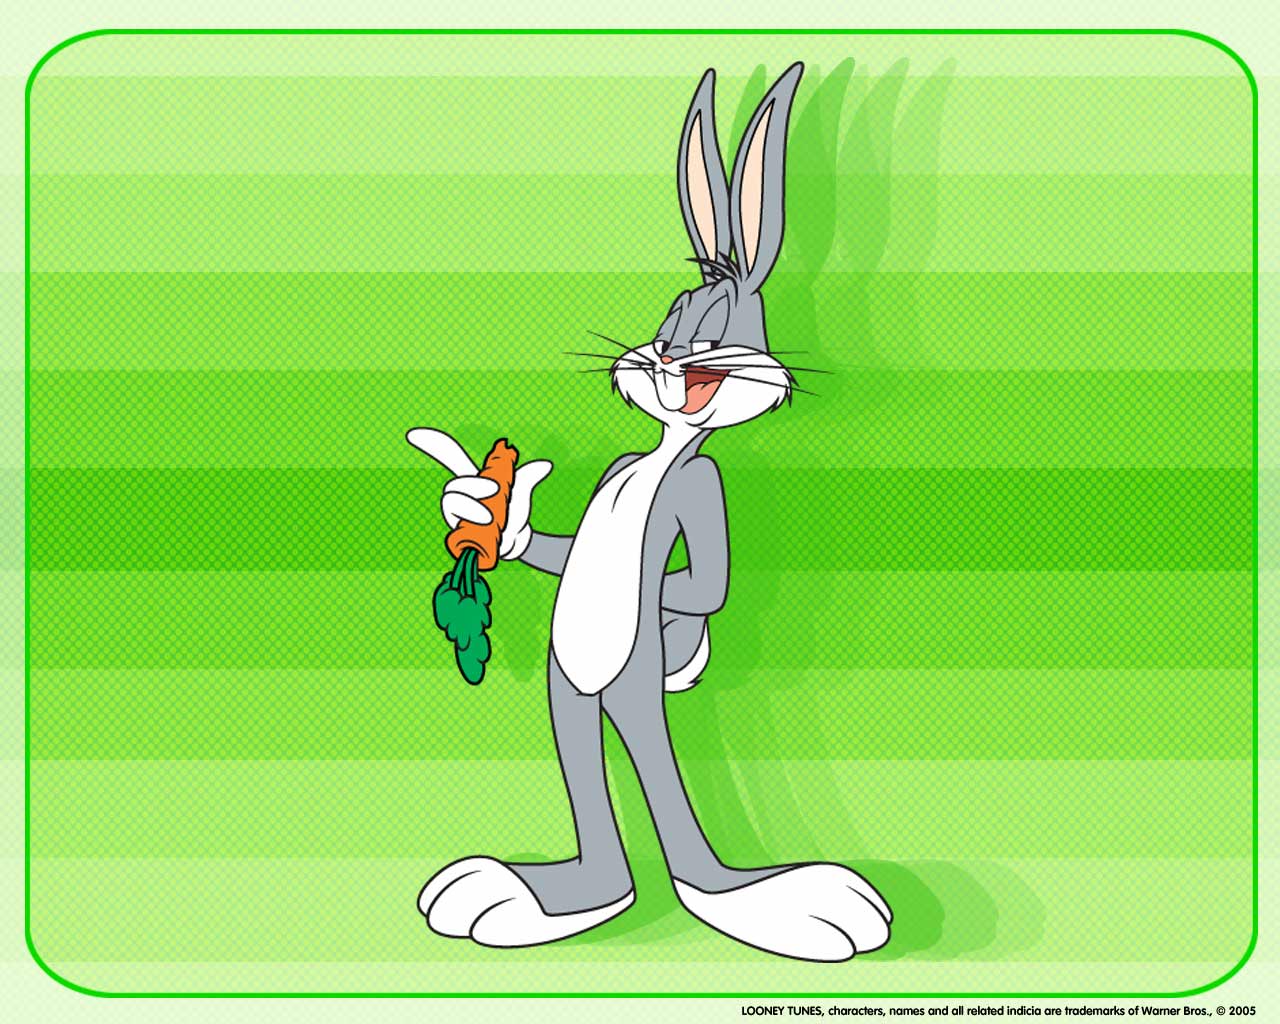 Download Free HD Wallpaper : Bugs Bunny Wallpapers Free - Download ...